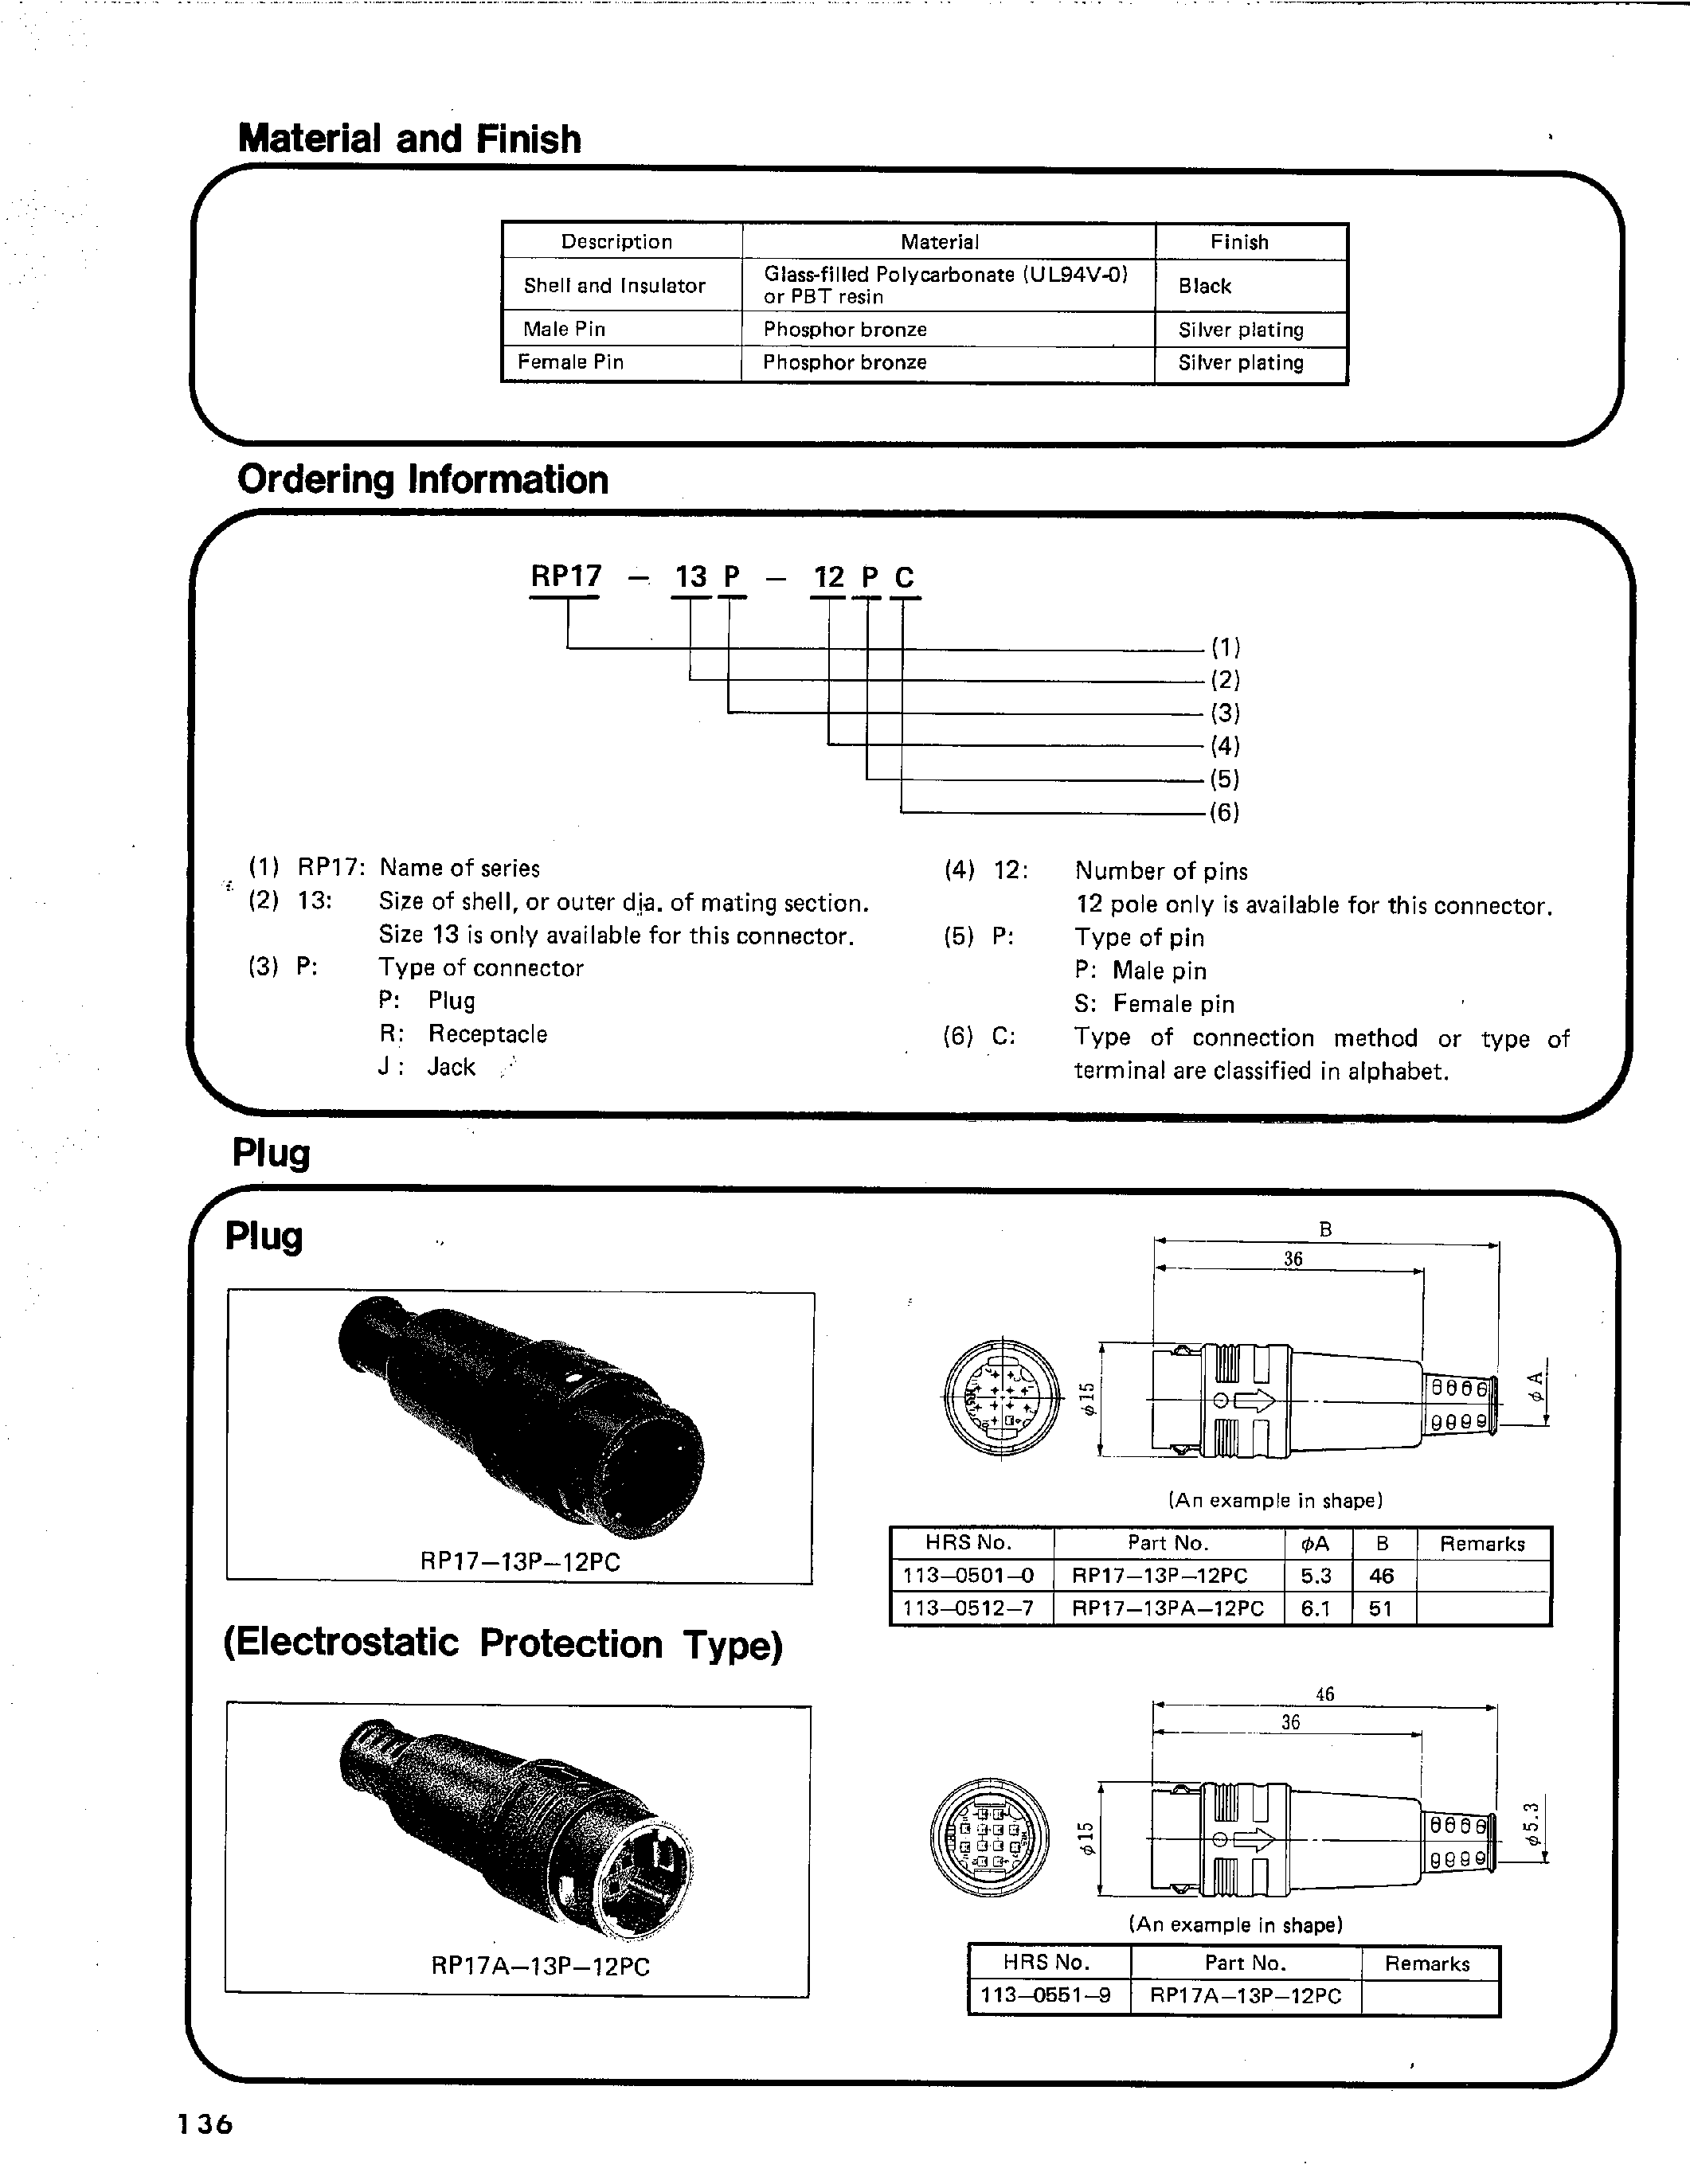 Datasheet RP1713-R-12PC - Push-Pull Lock Connectors page 2